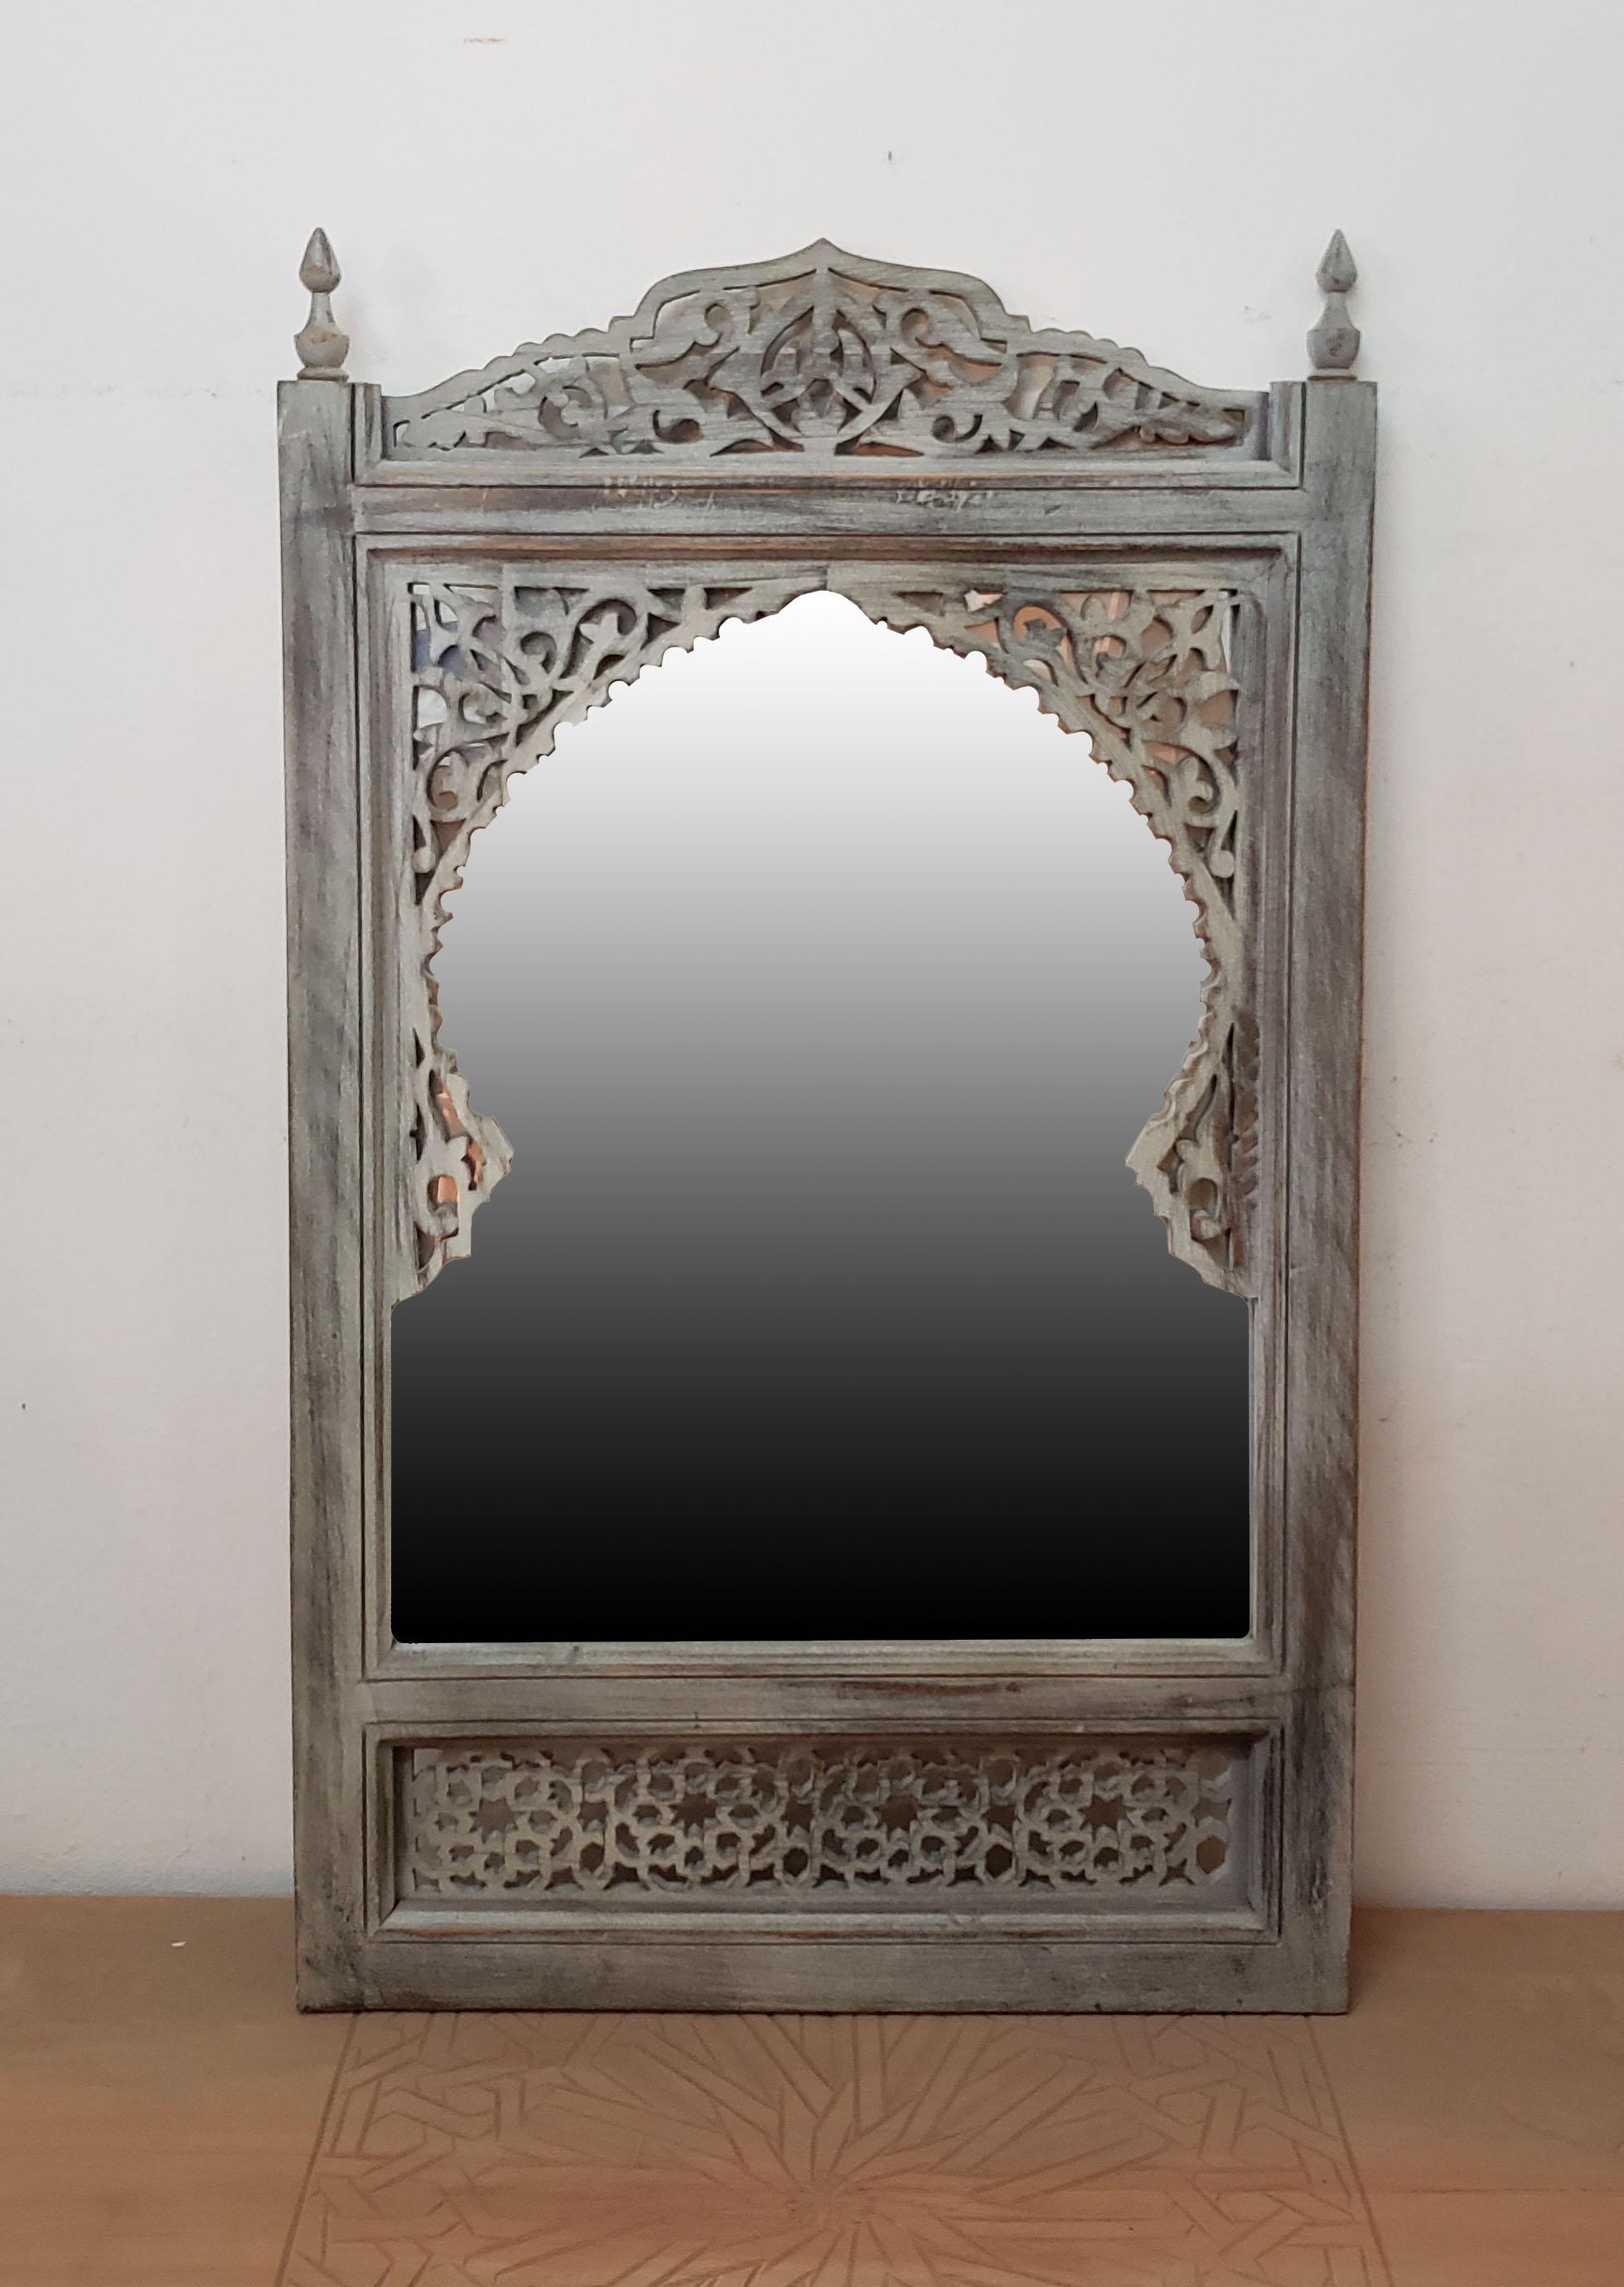 Color: White
Moroccan hand carved cedar wood mirror and frame measuring approximately 30” in height, 18” in width, and 2